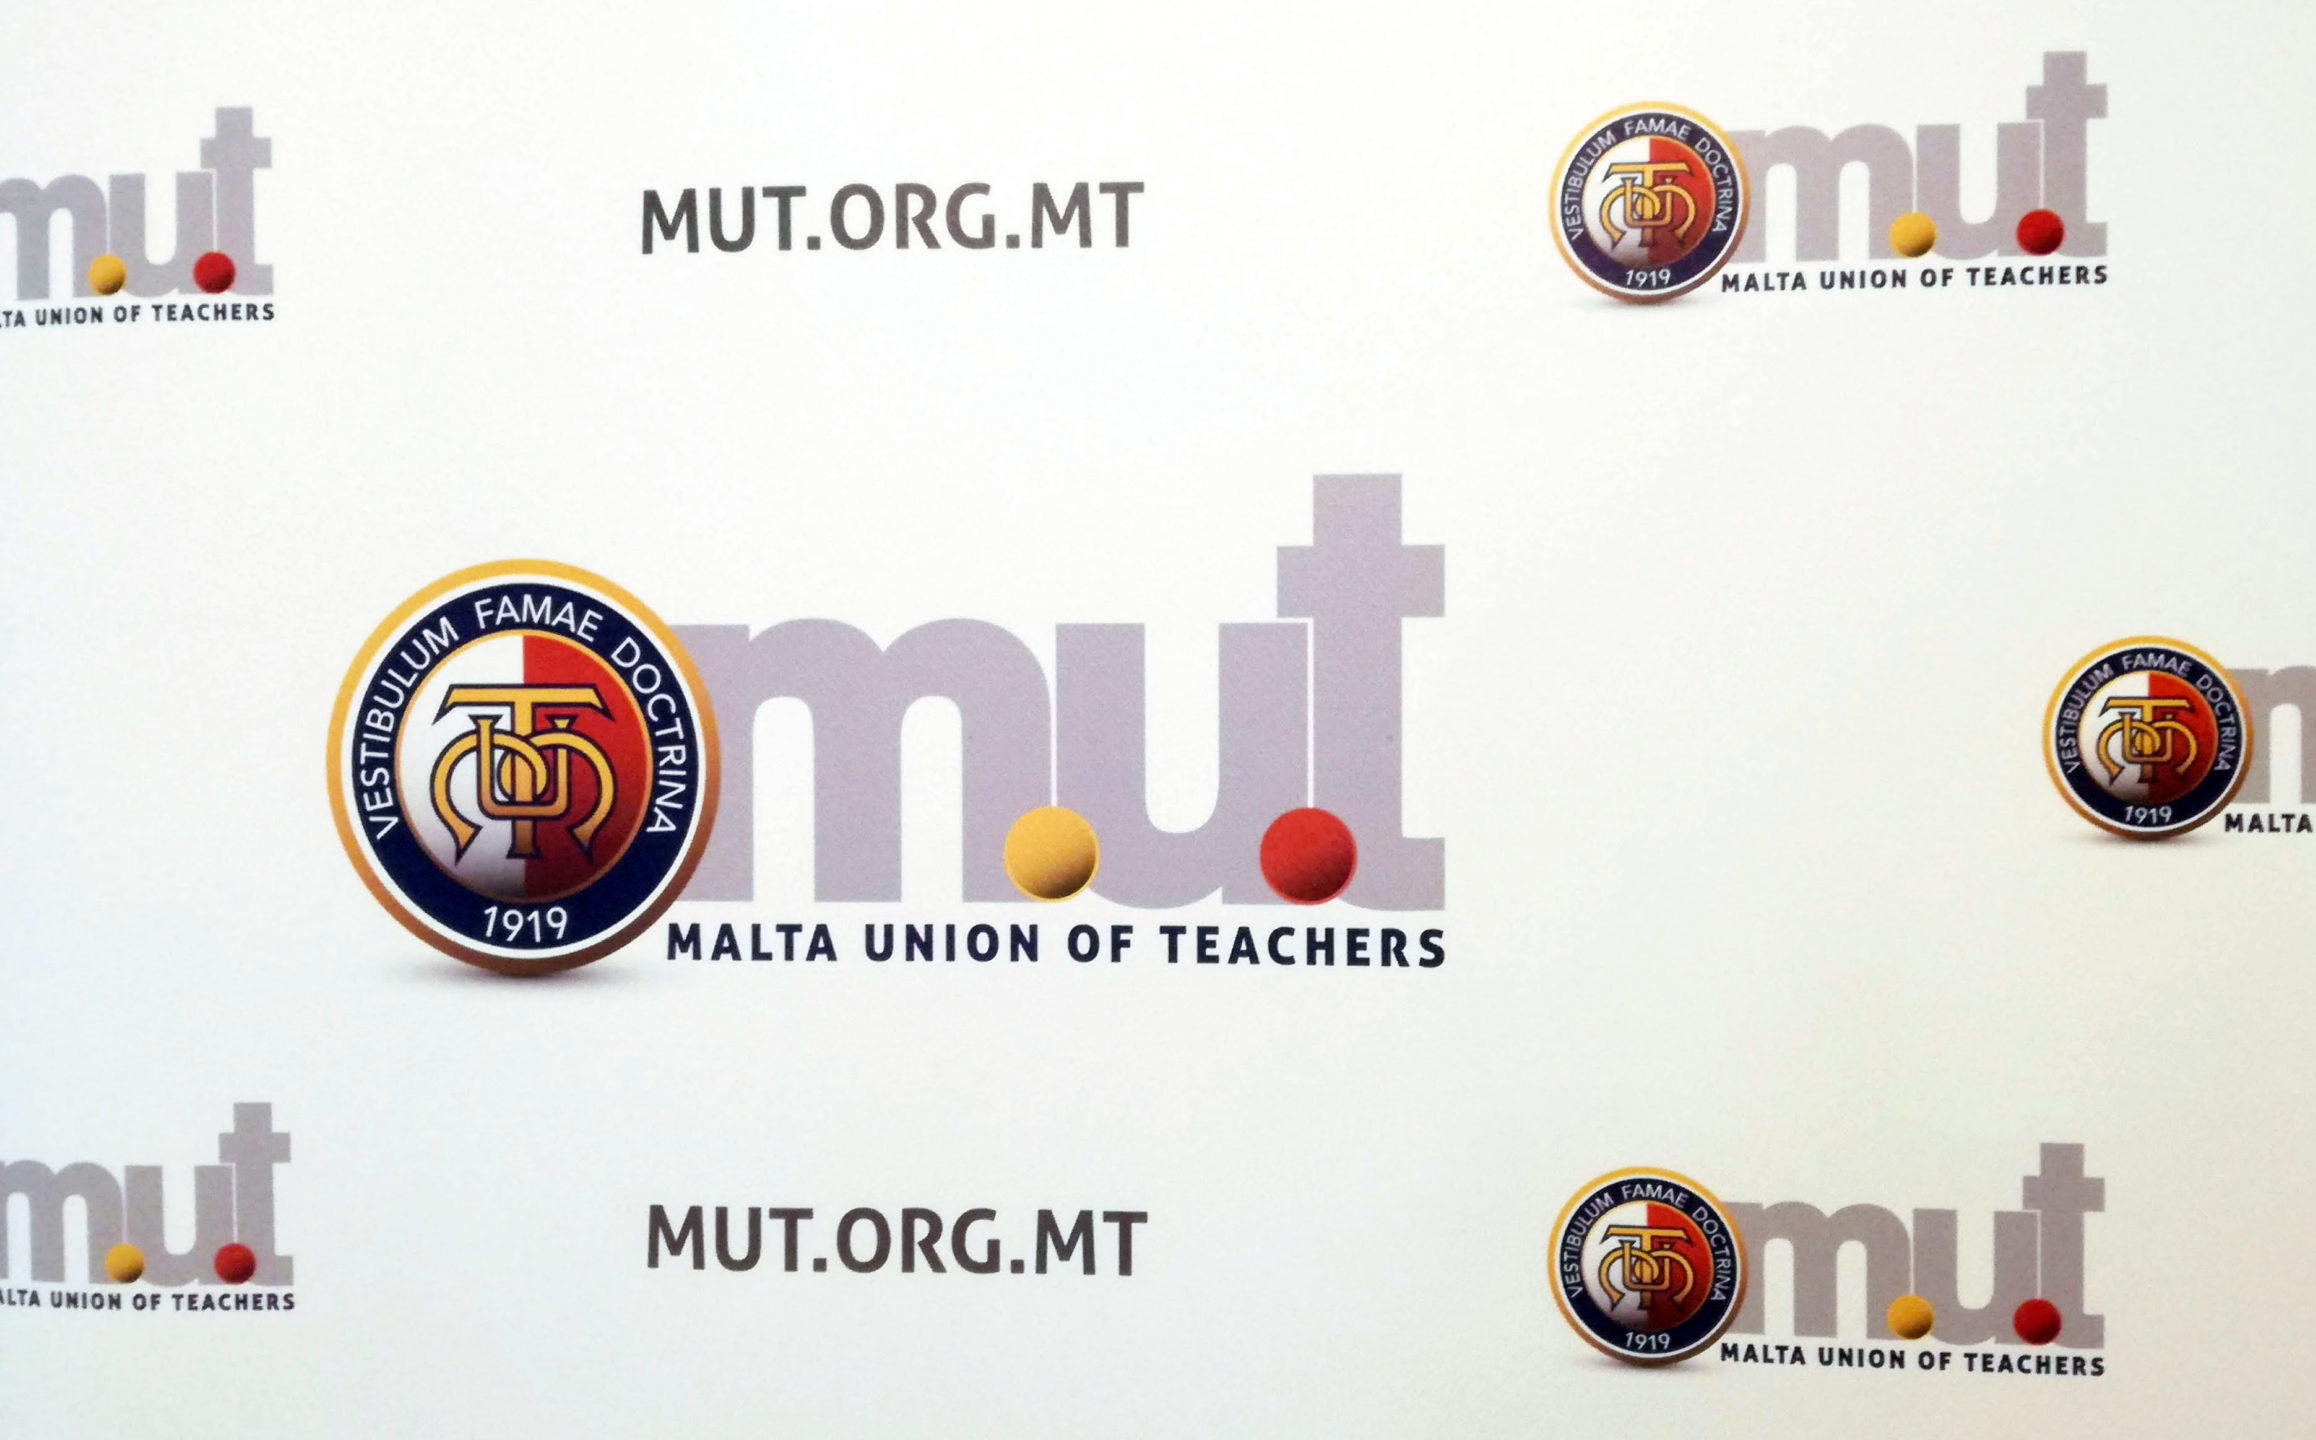 MUT and Ministry to start discussing implementation of re-opening of schools